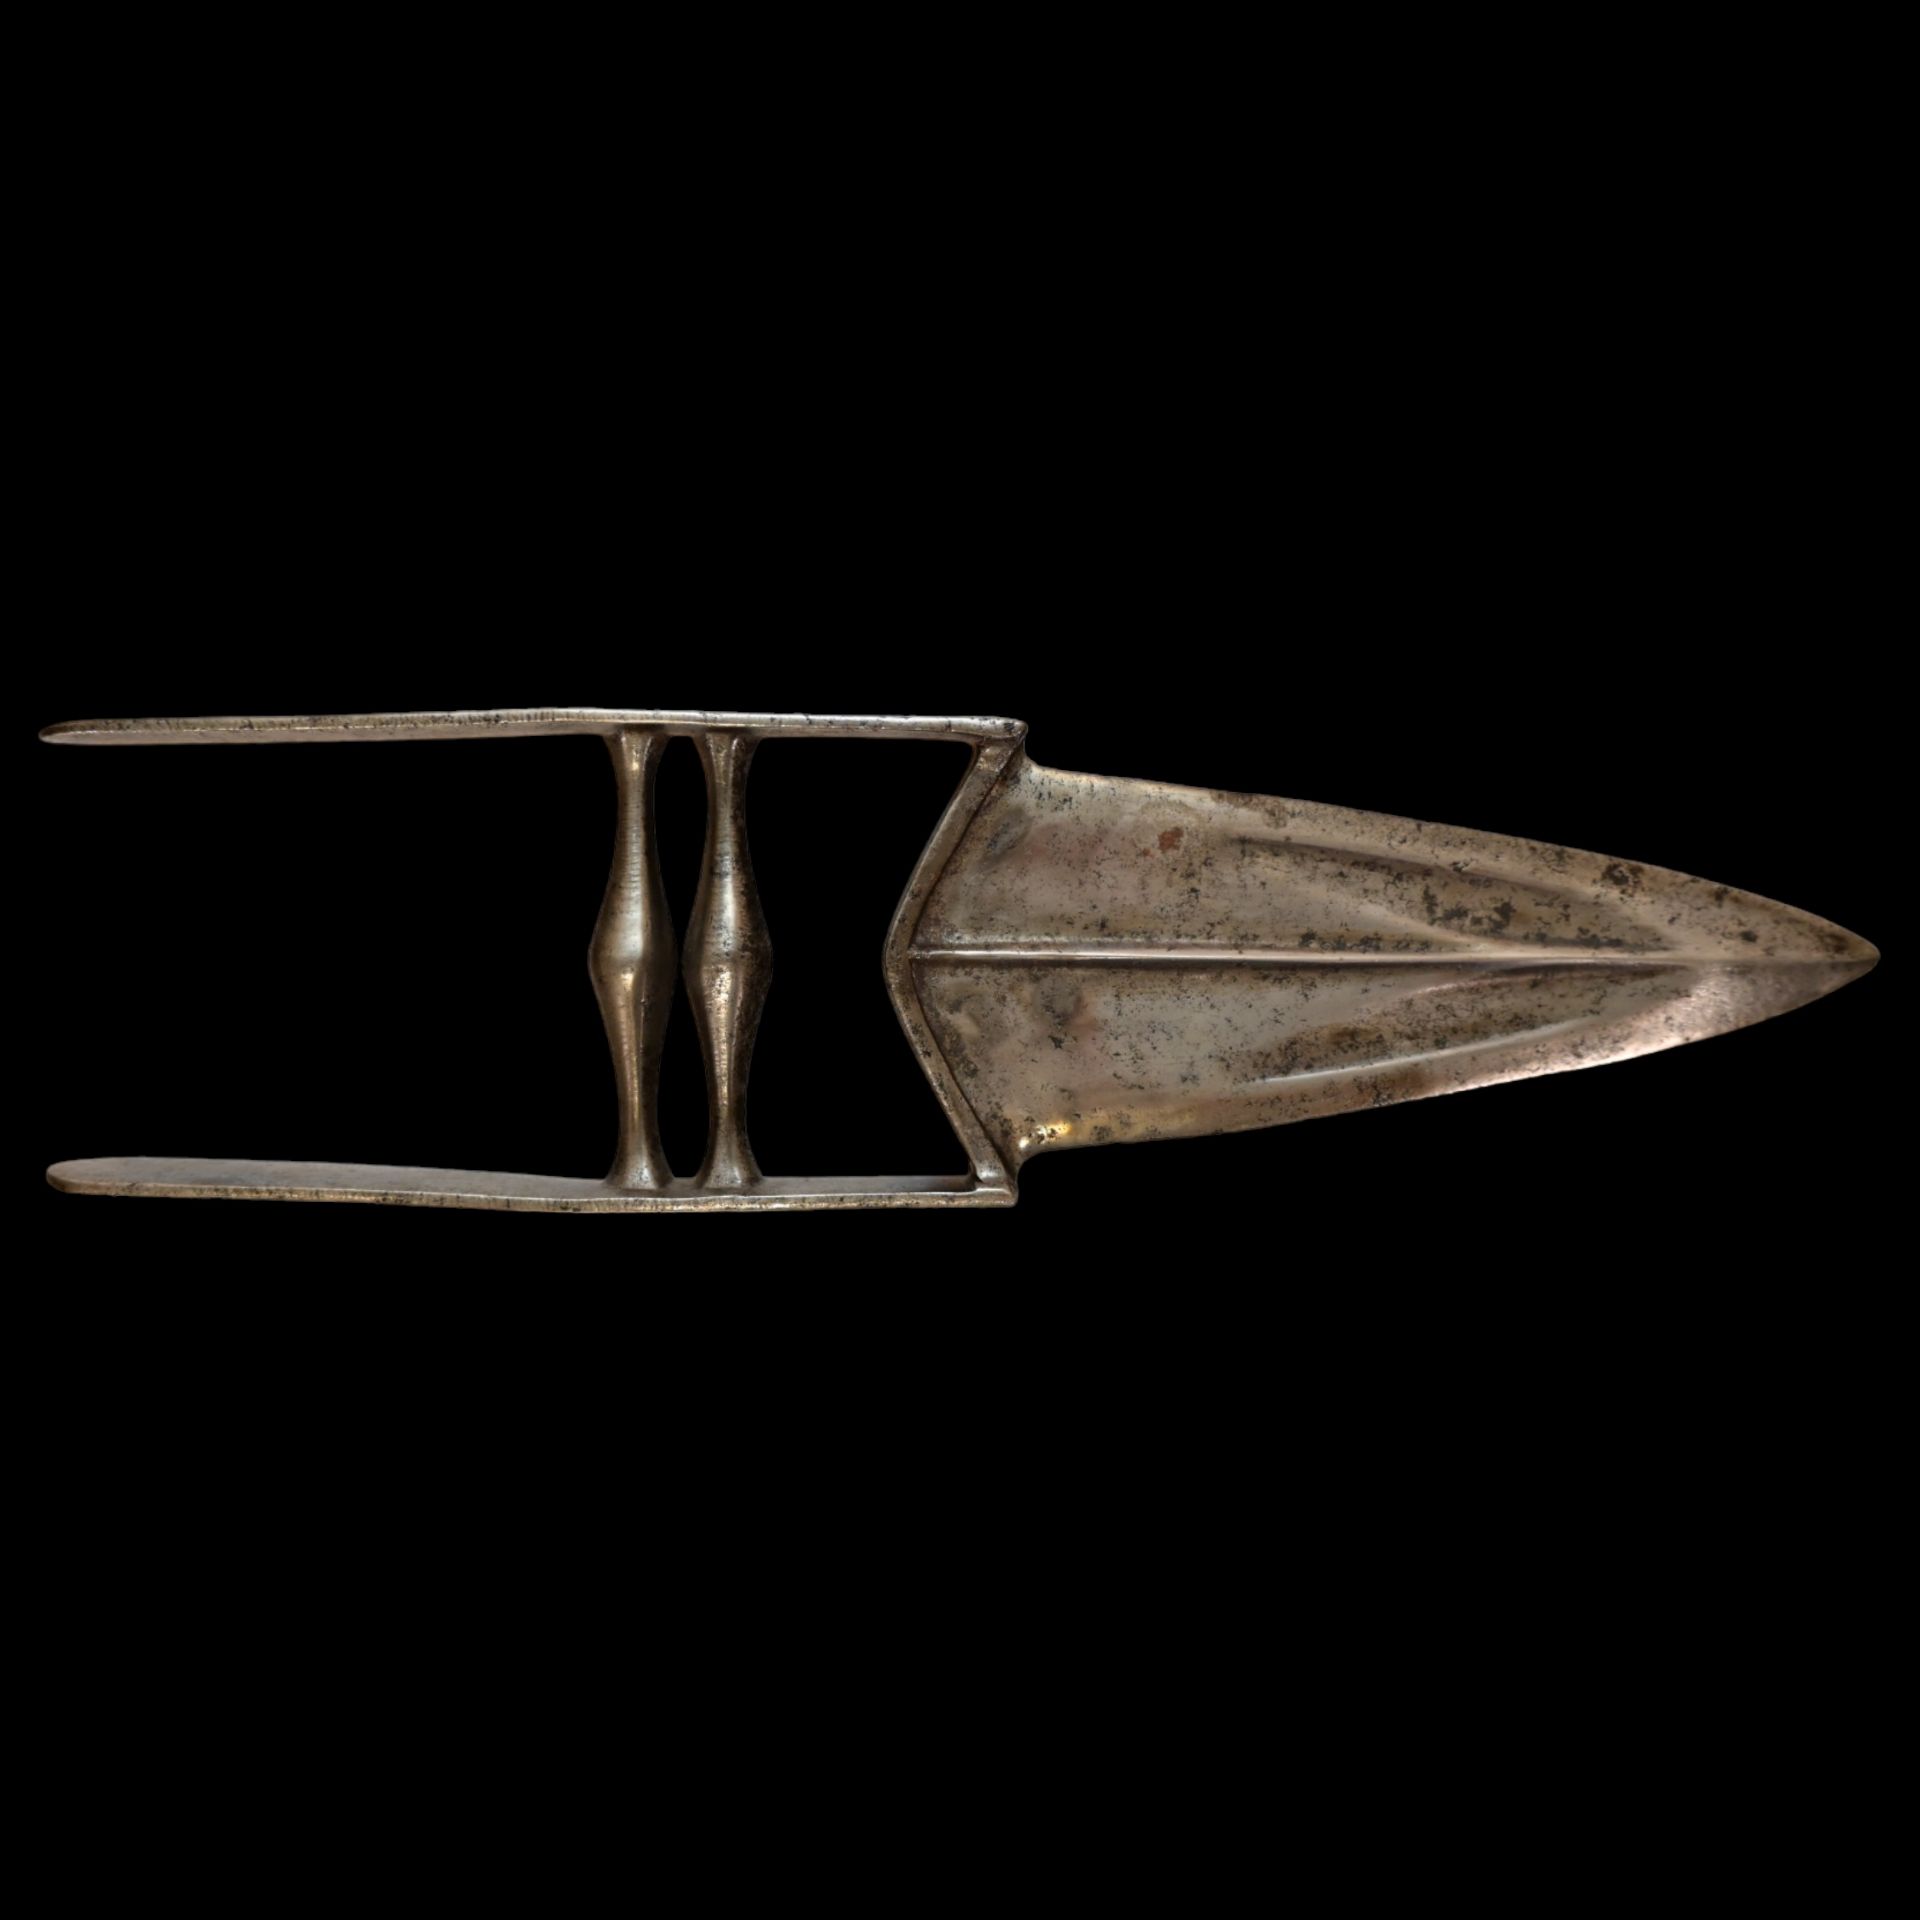 South Indian Katar dagger, 18th century. - Image 3 of 5